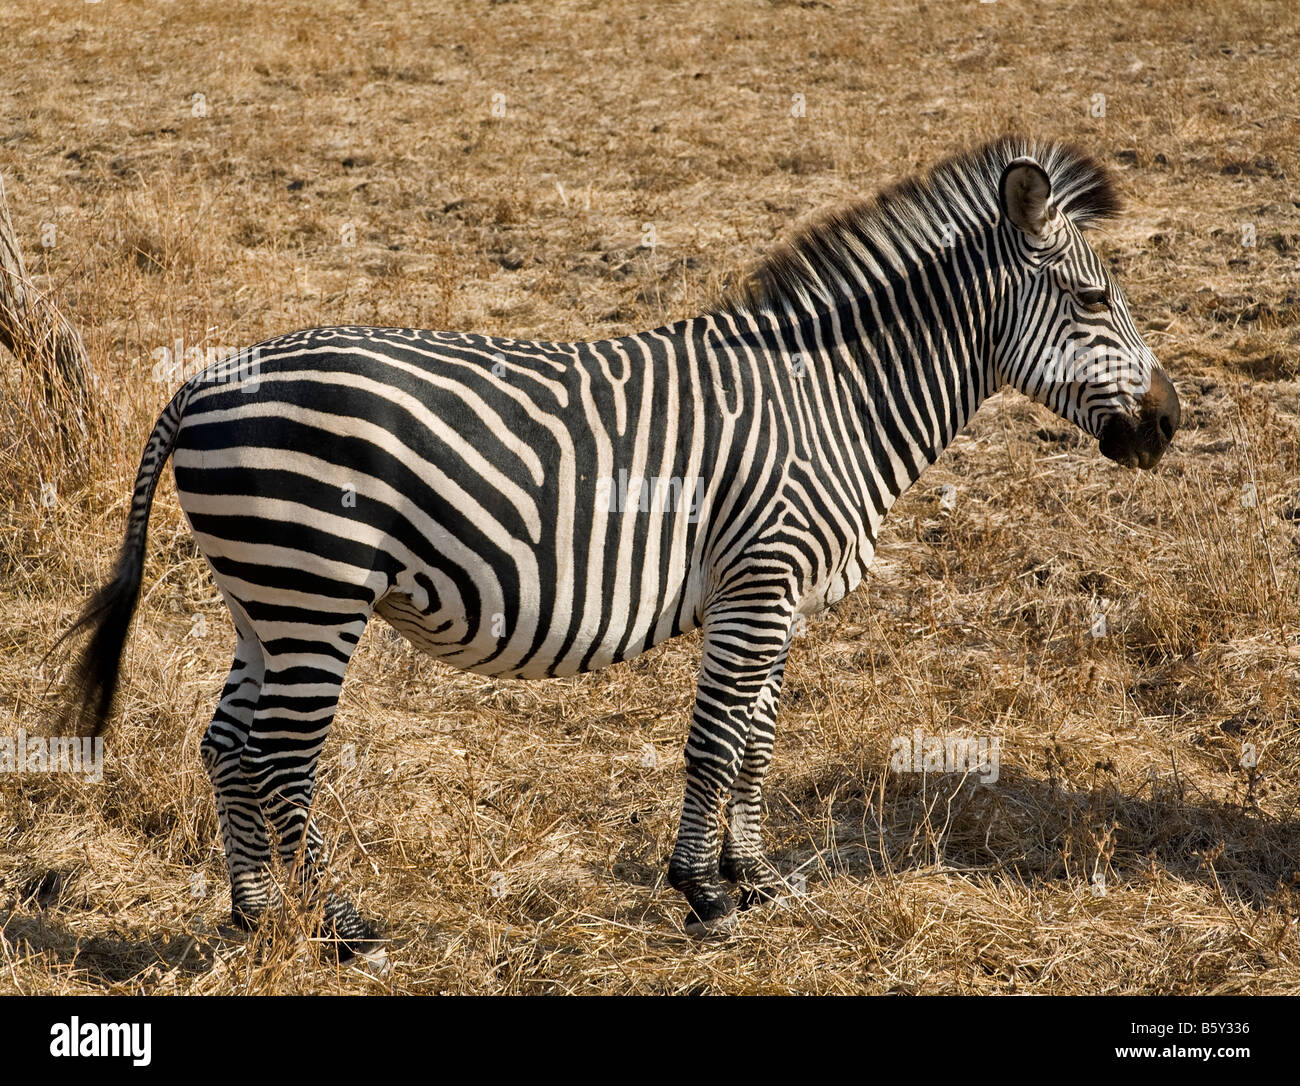 Plains zebra at South Luangwa National Park in Zambia Stock Photo